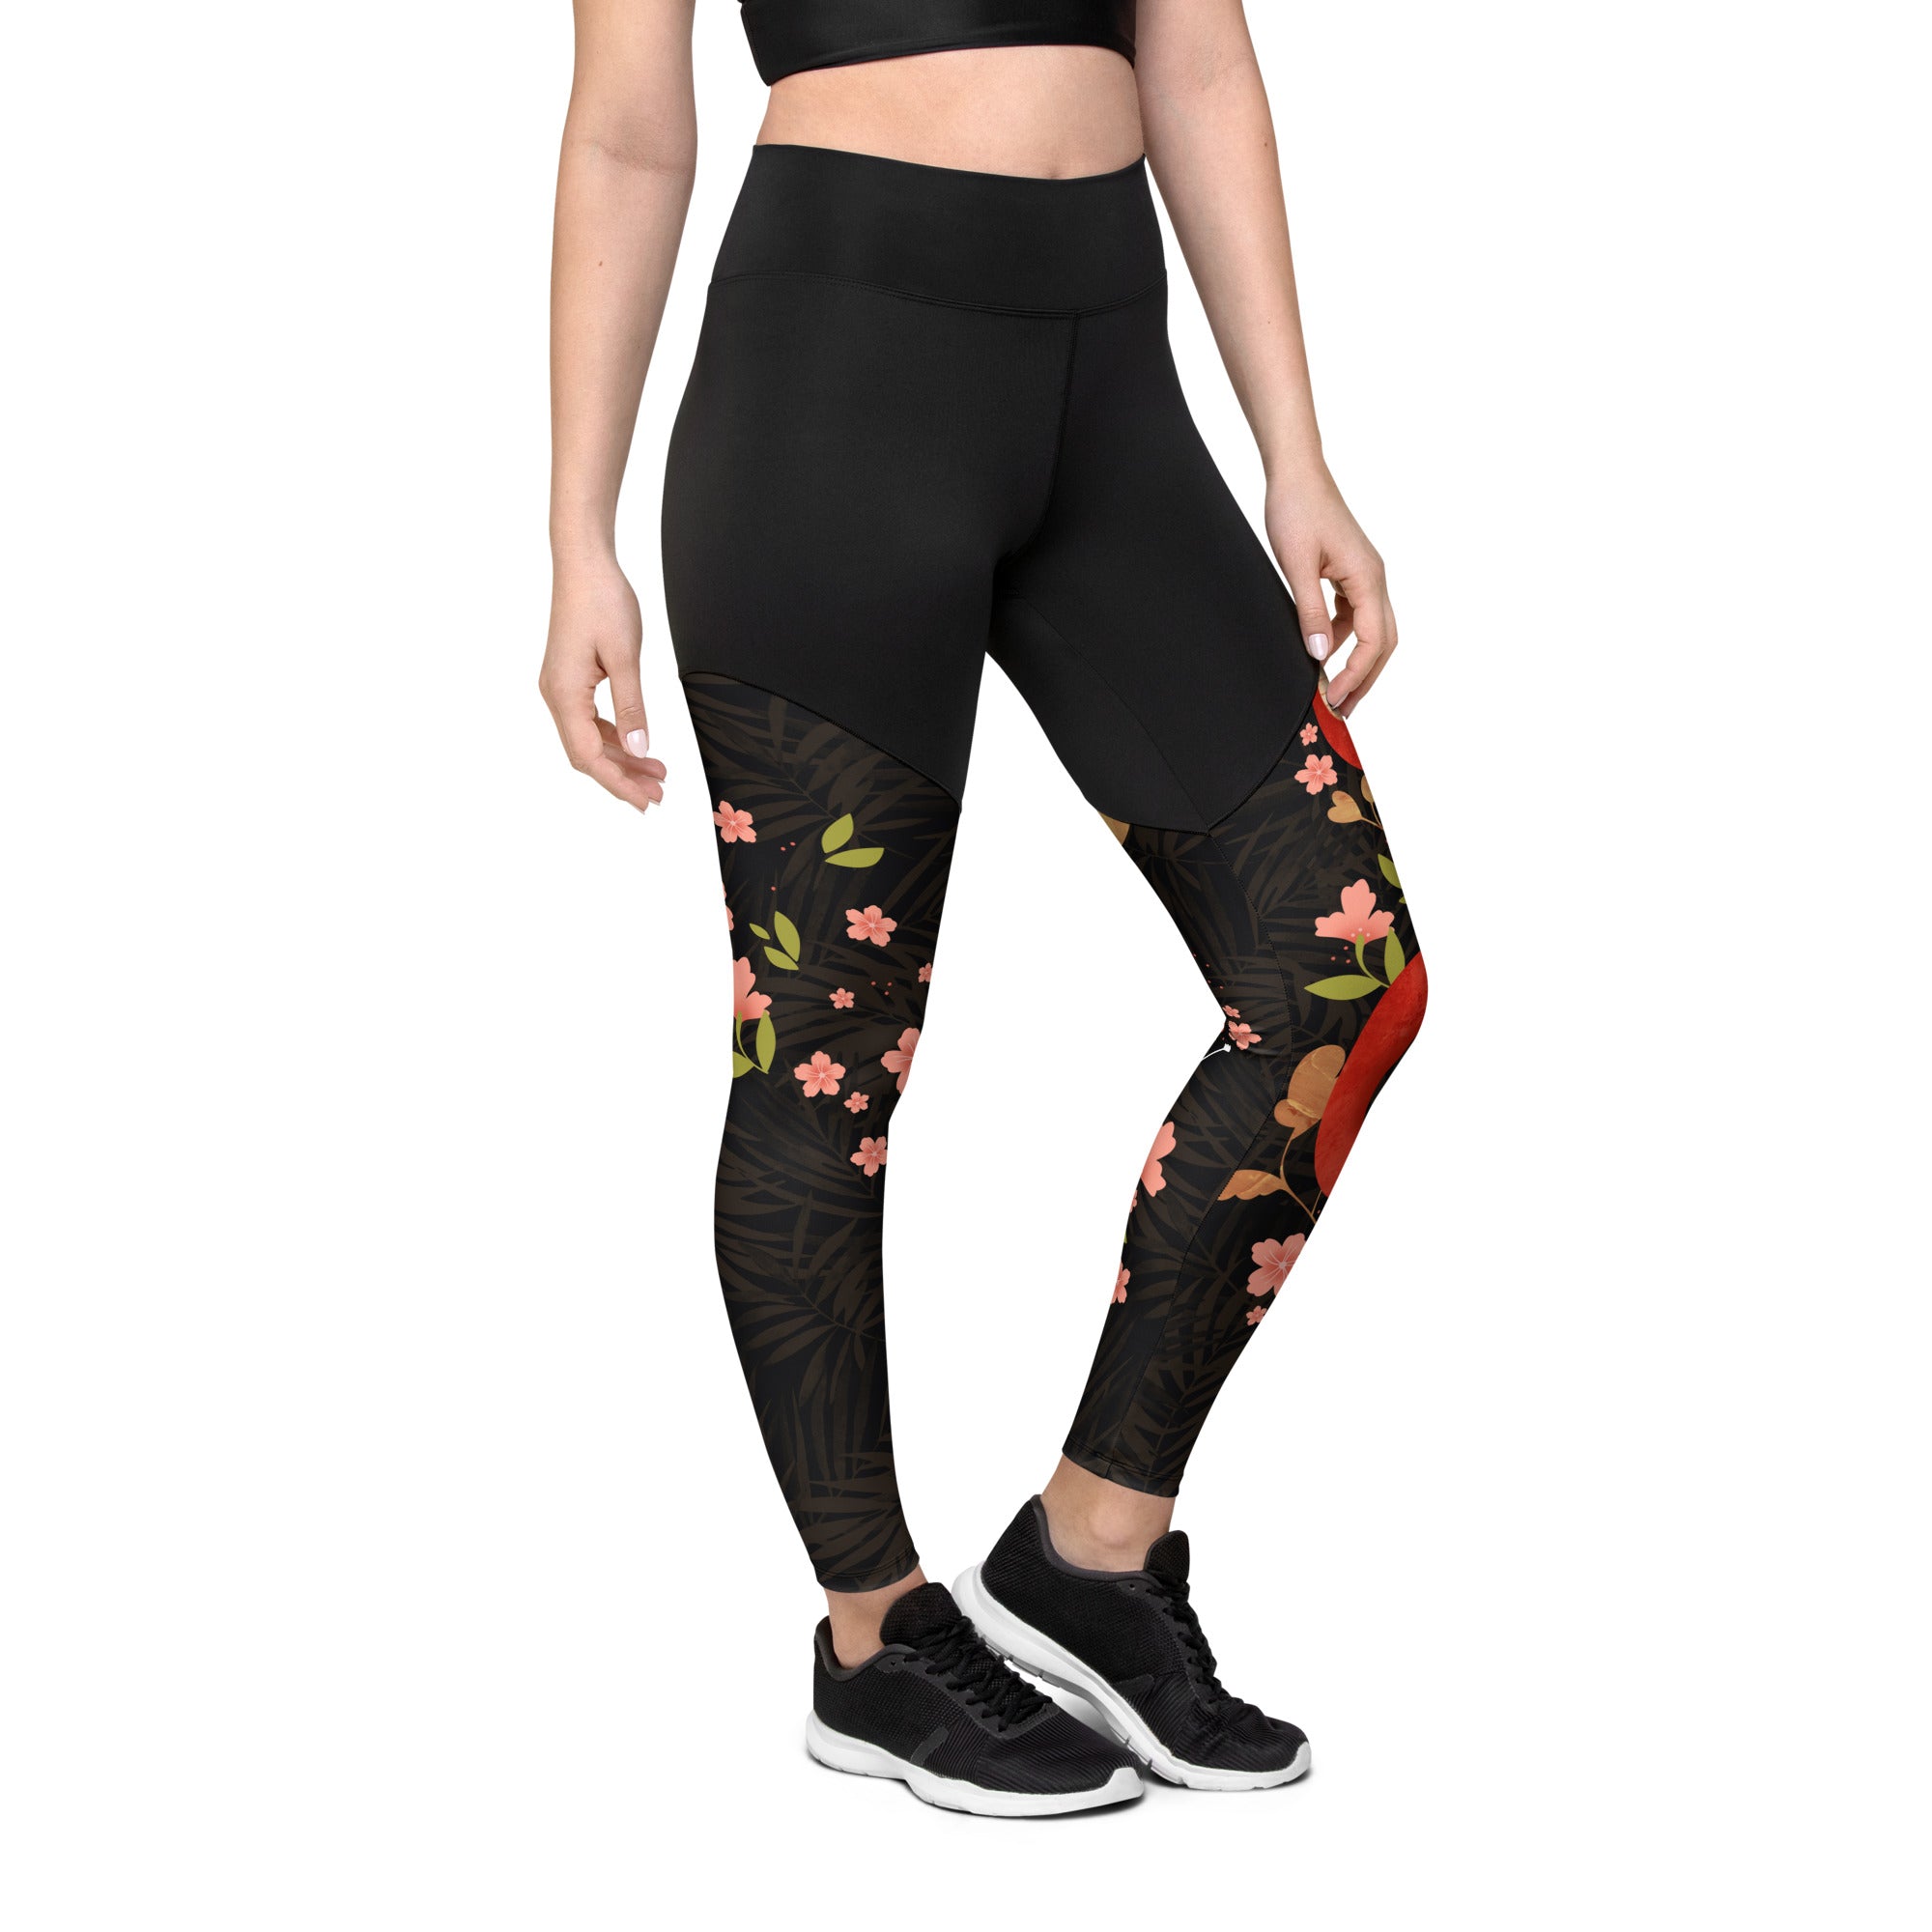 Snakes & Flowers Compression Leggings